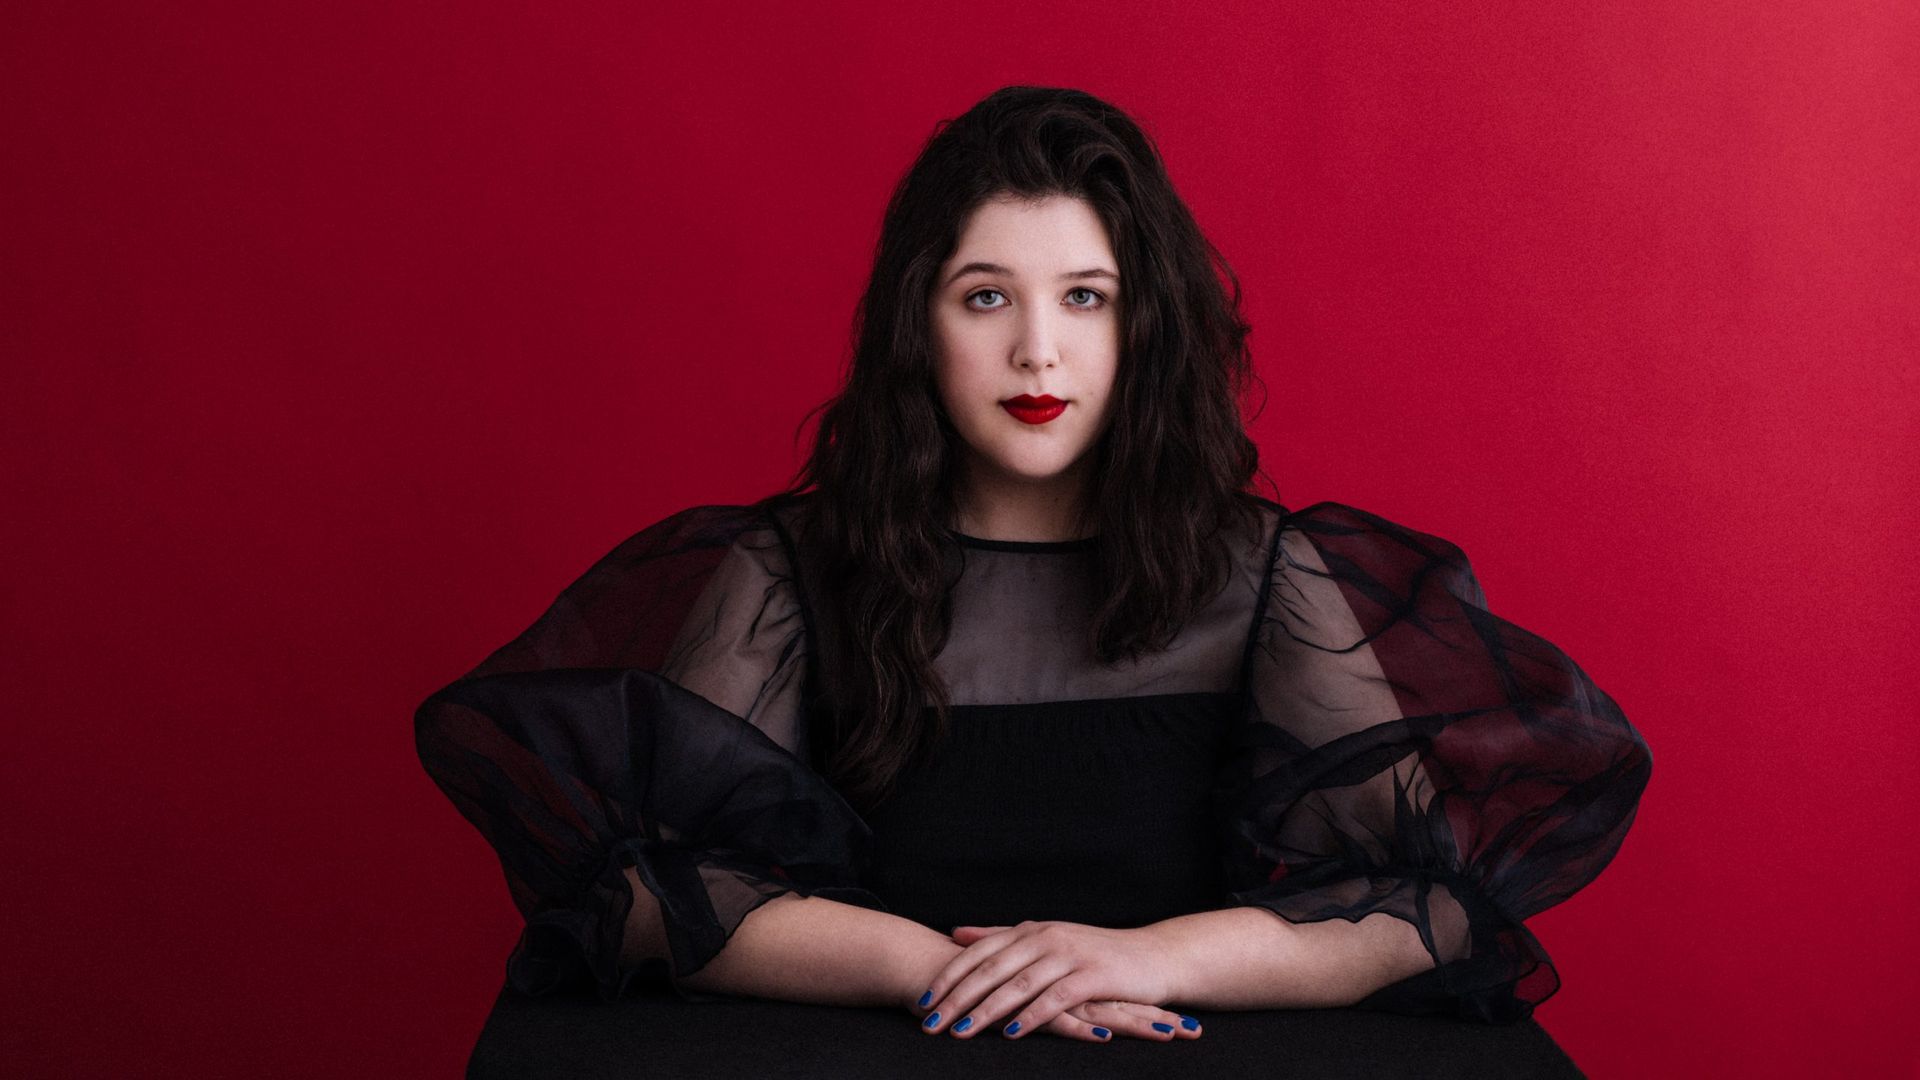 Lucy Dacus poses for a portrait in a black dress in front of a crimson red background.